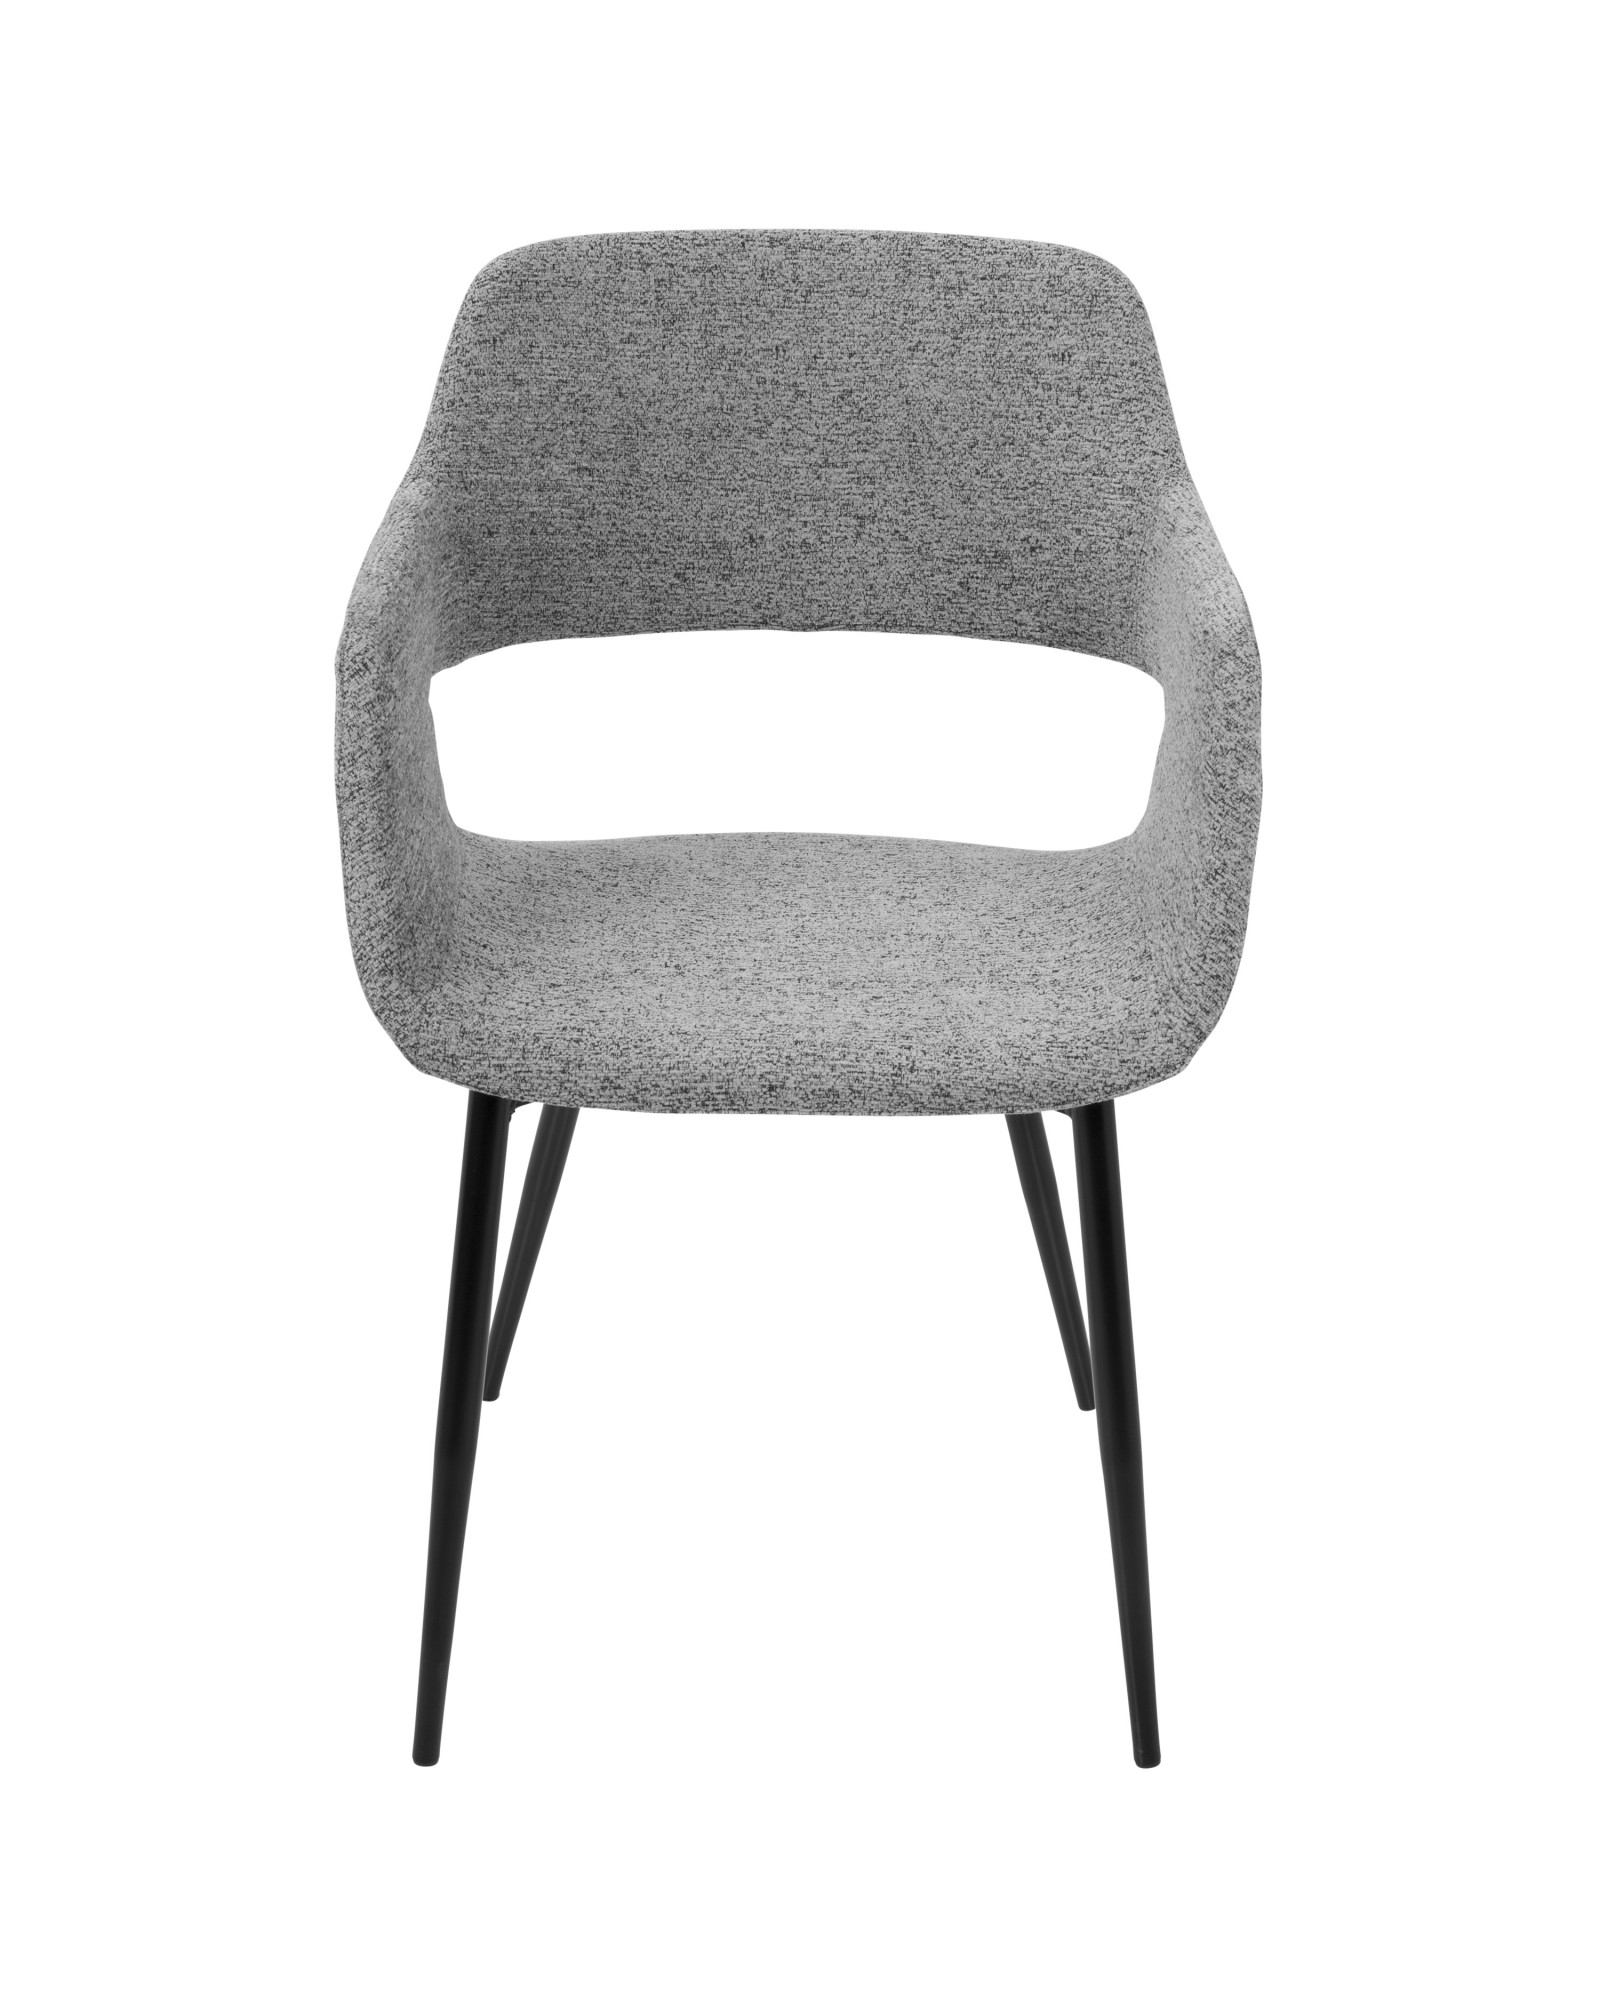 Margarite Mid-Century Modern Dining/Accent Chair in Black with Grey Fabric - Set of 2